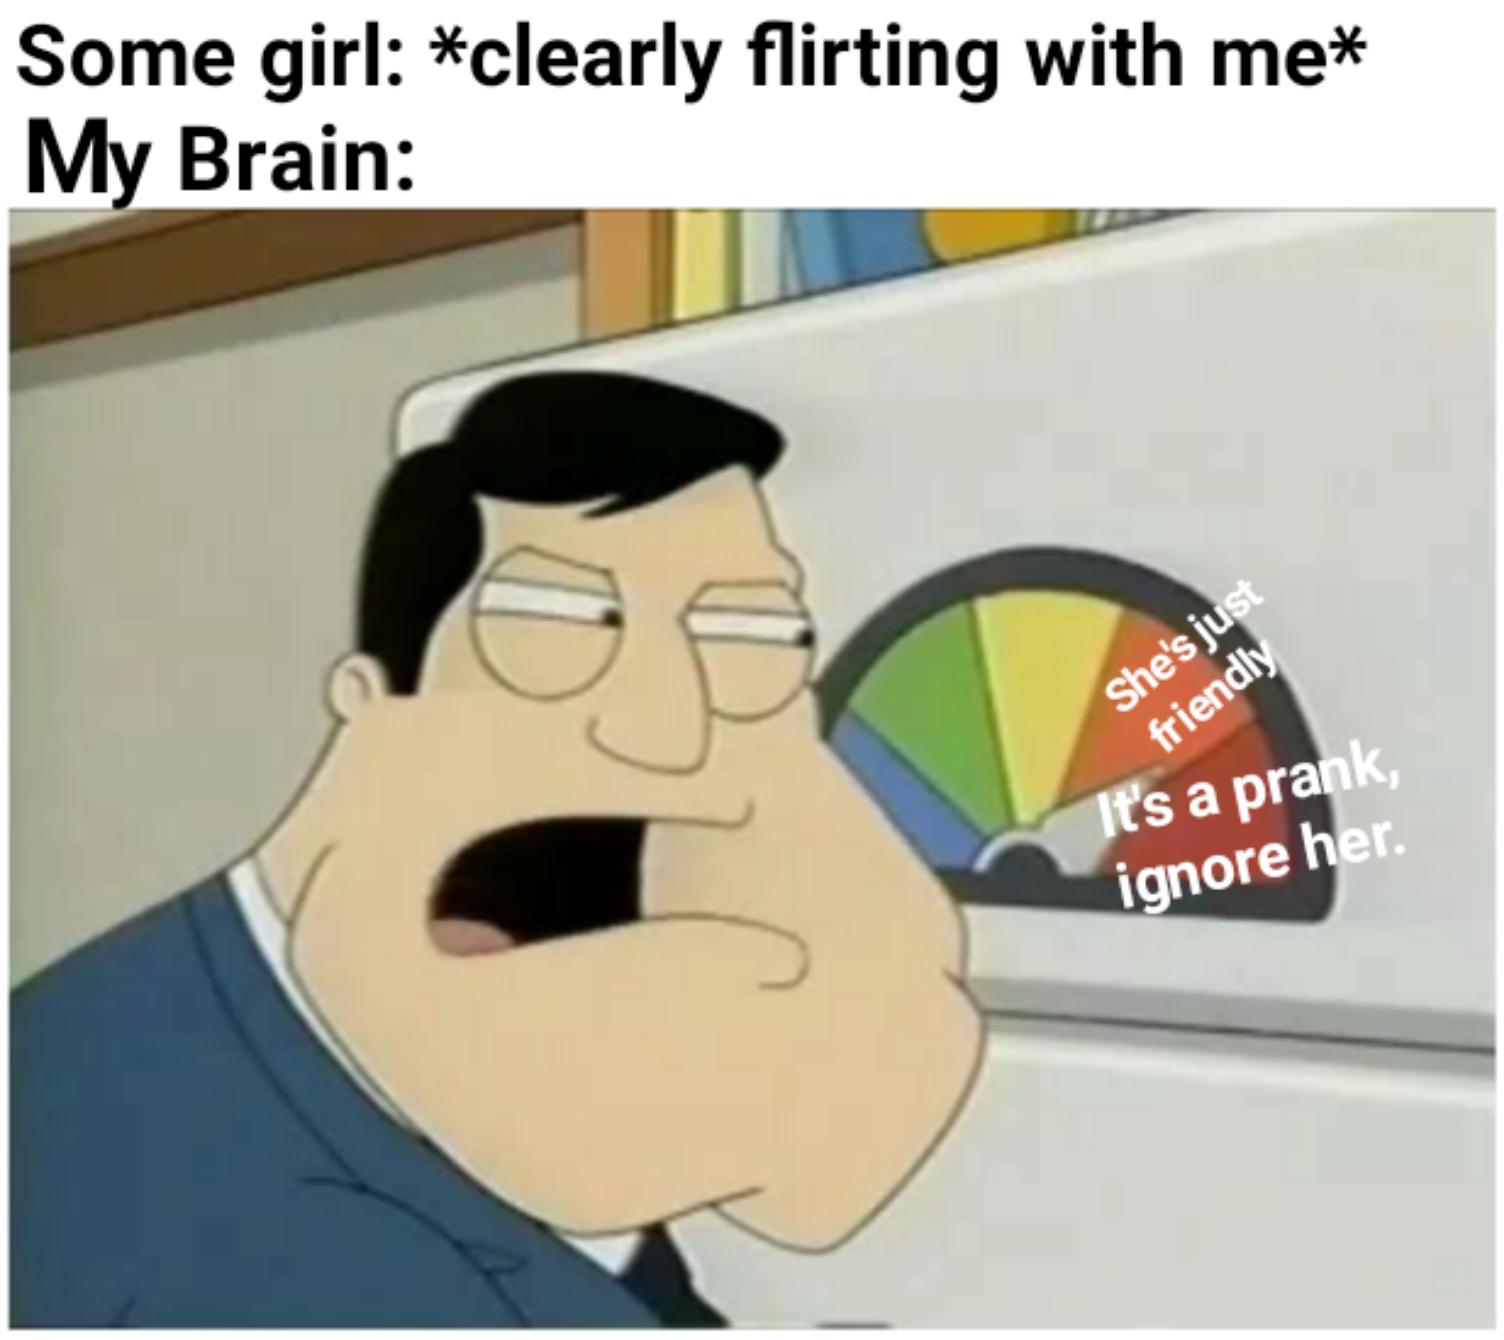 funny memes - dank memes - google is sus - Some girl clearly flirting with me My Brain 0 She's just friendly It's a prank, ignore her.